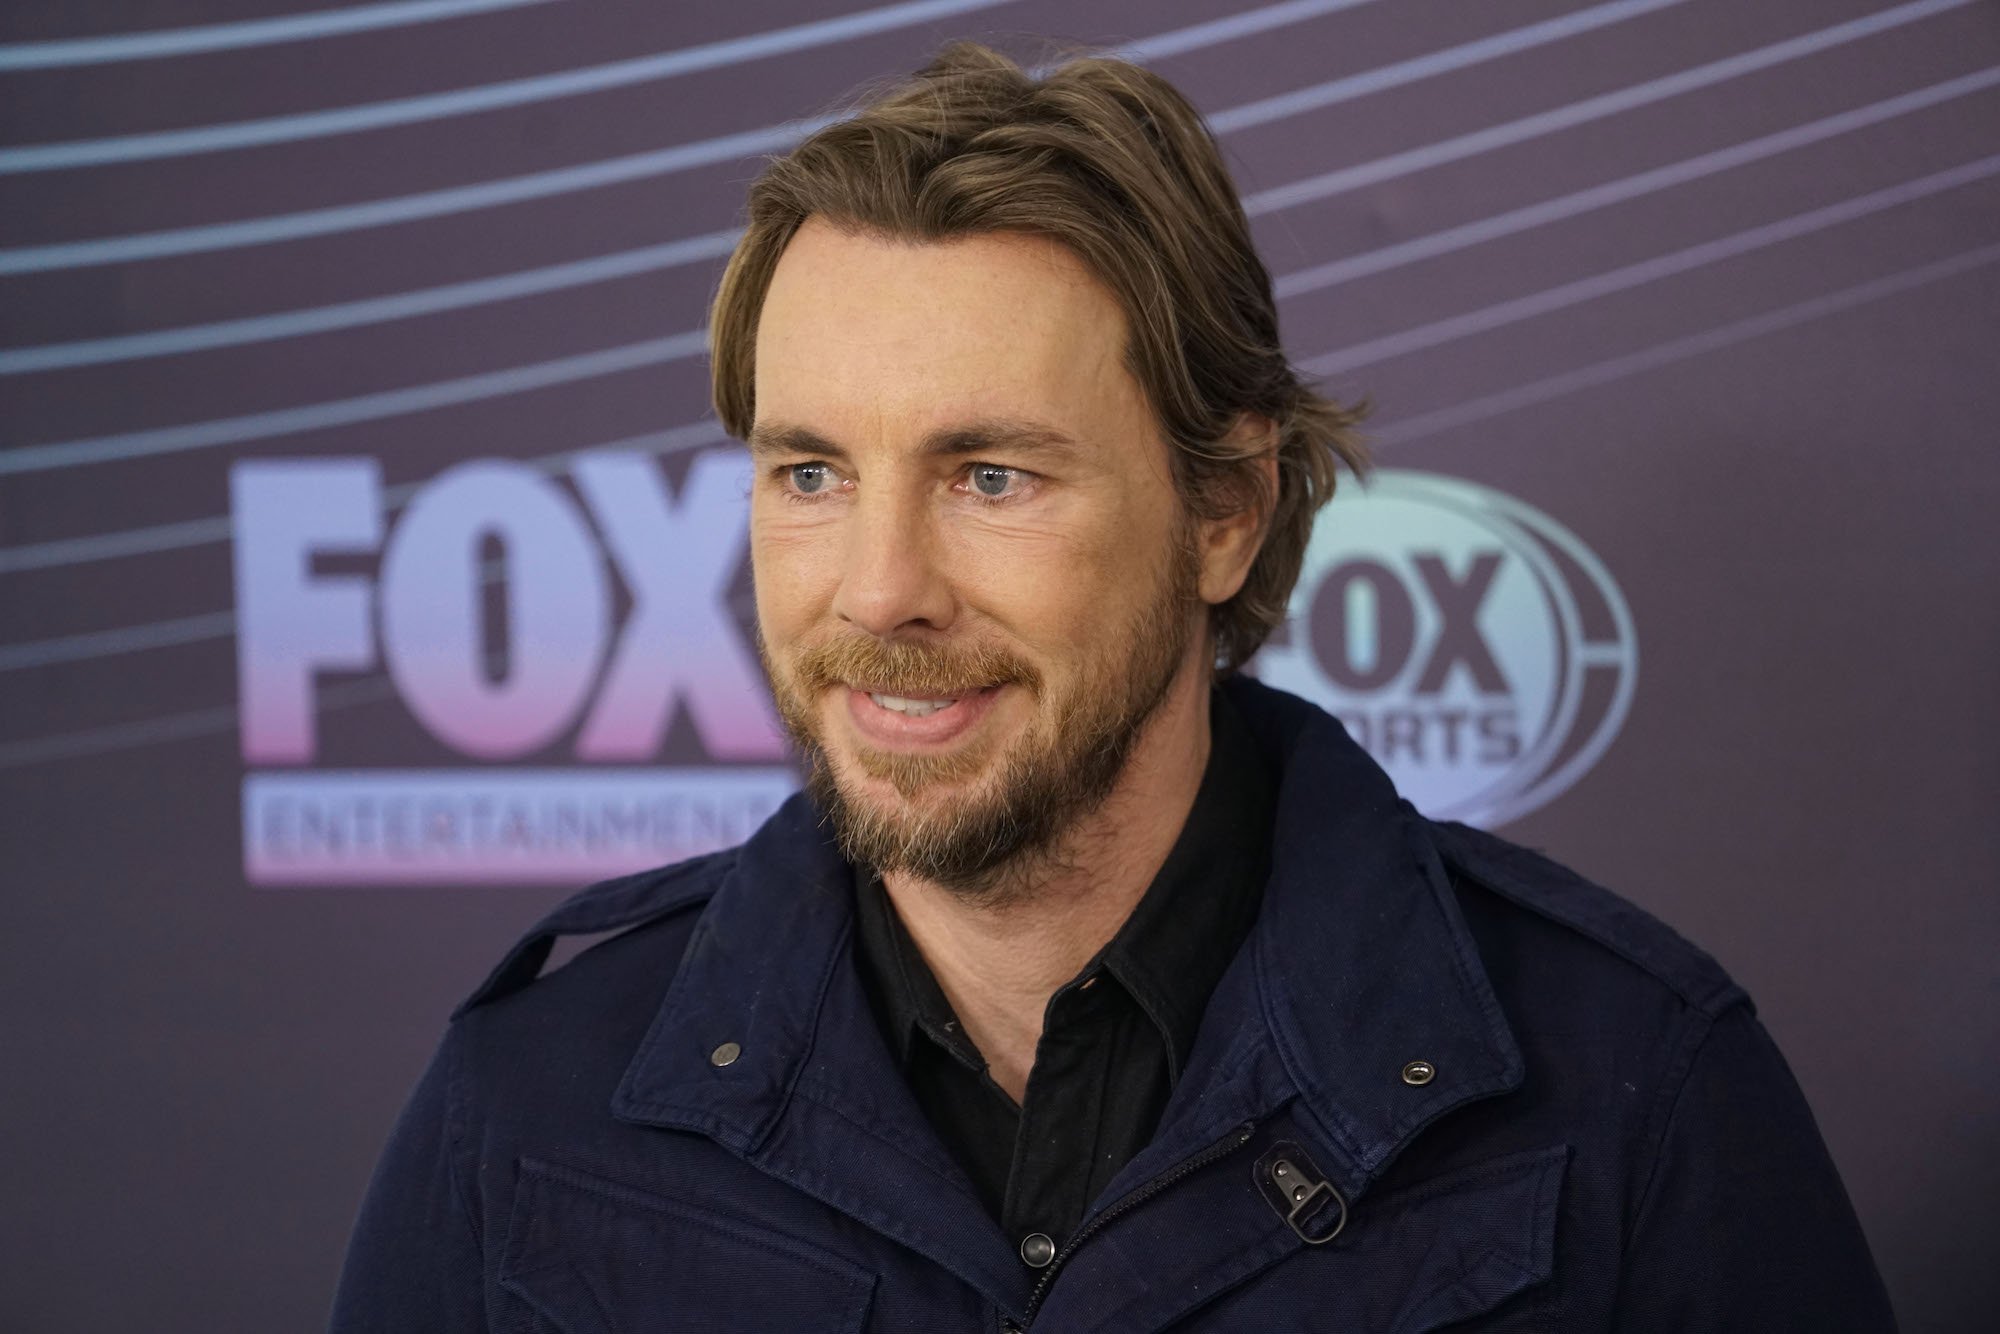 Dax Shepard smiling in front of a dark background